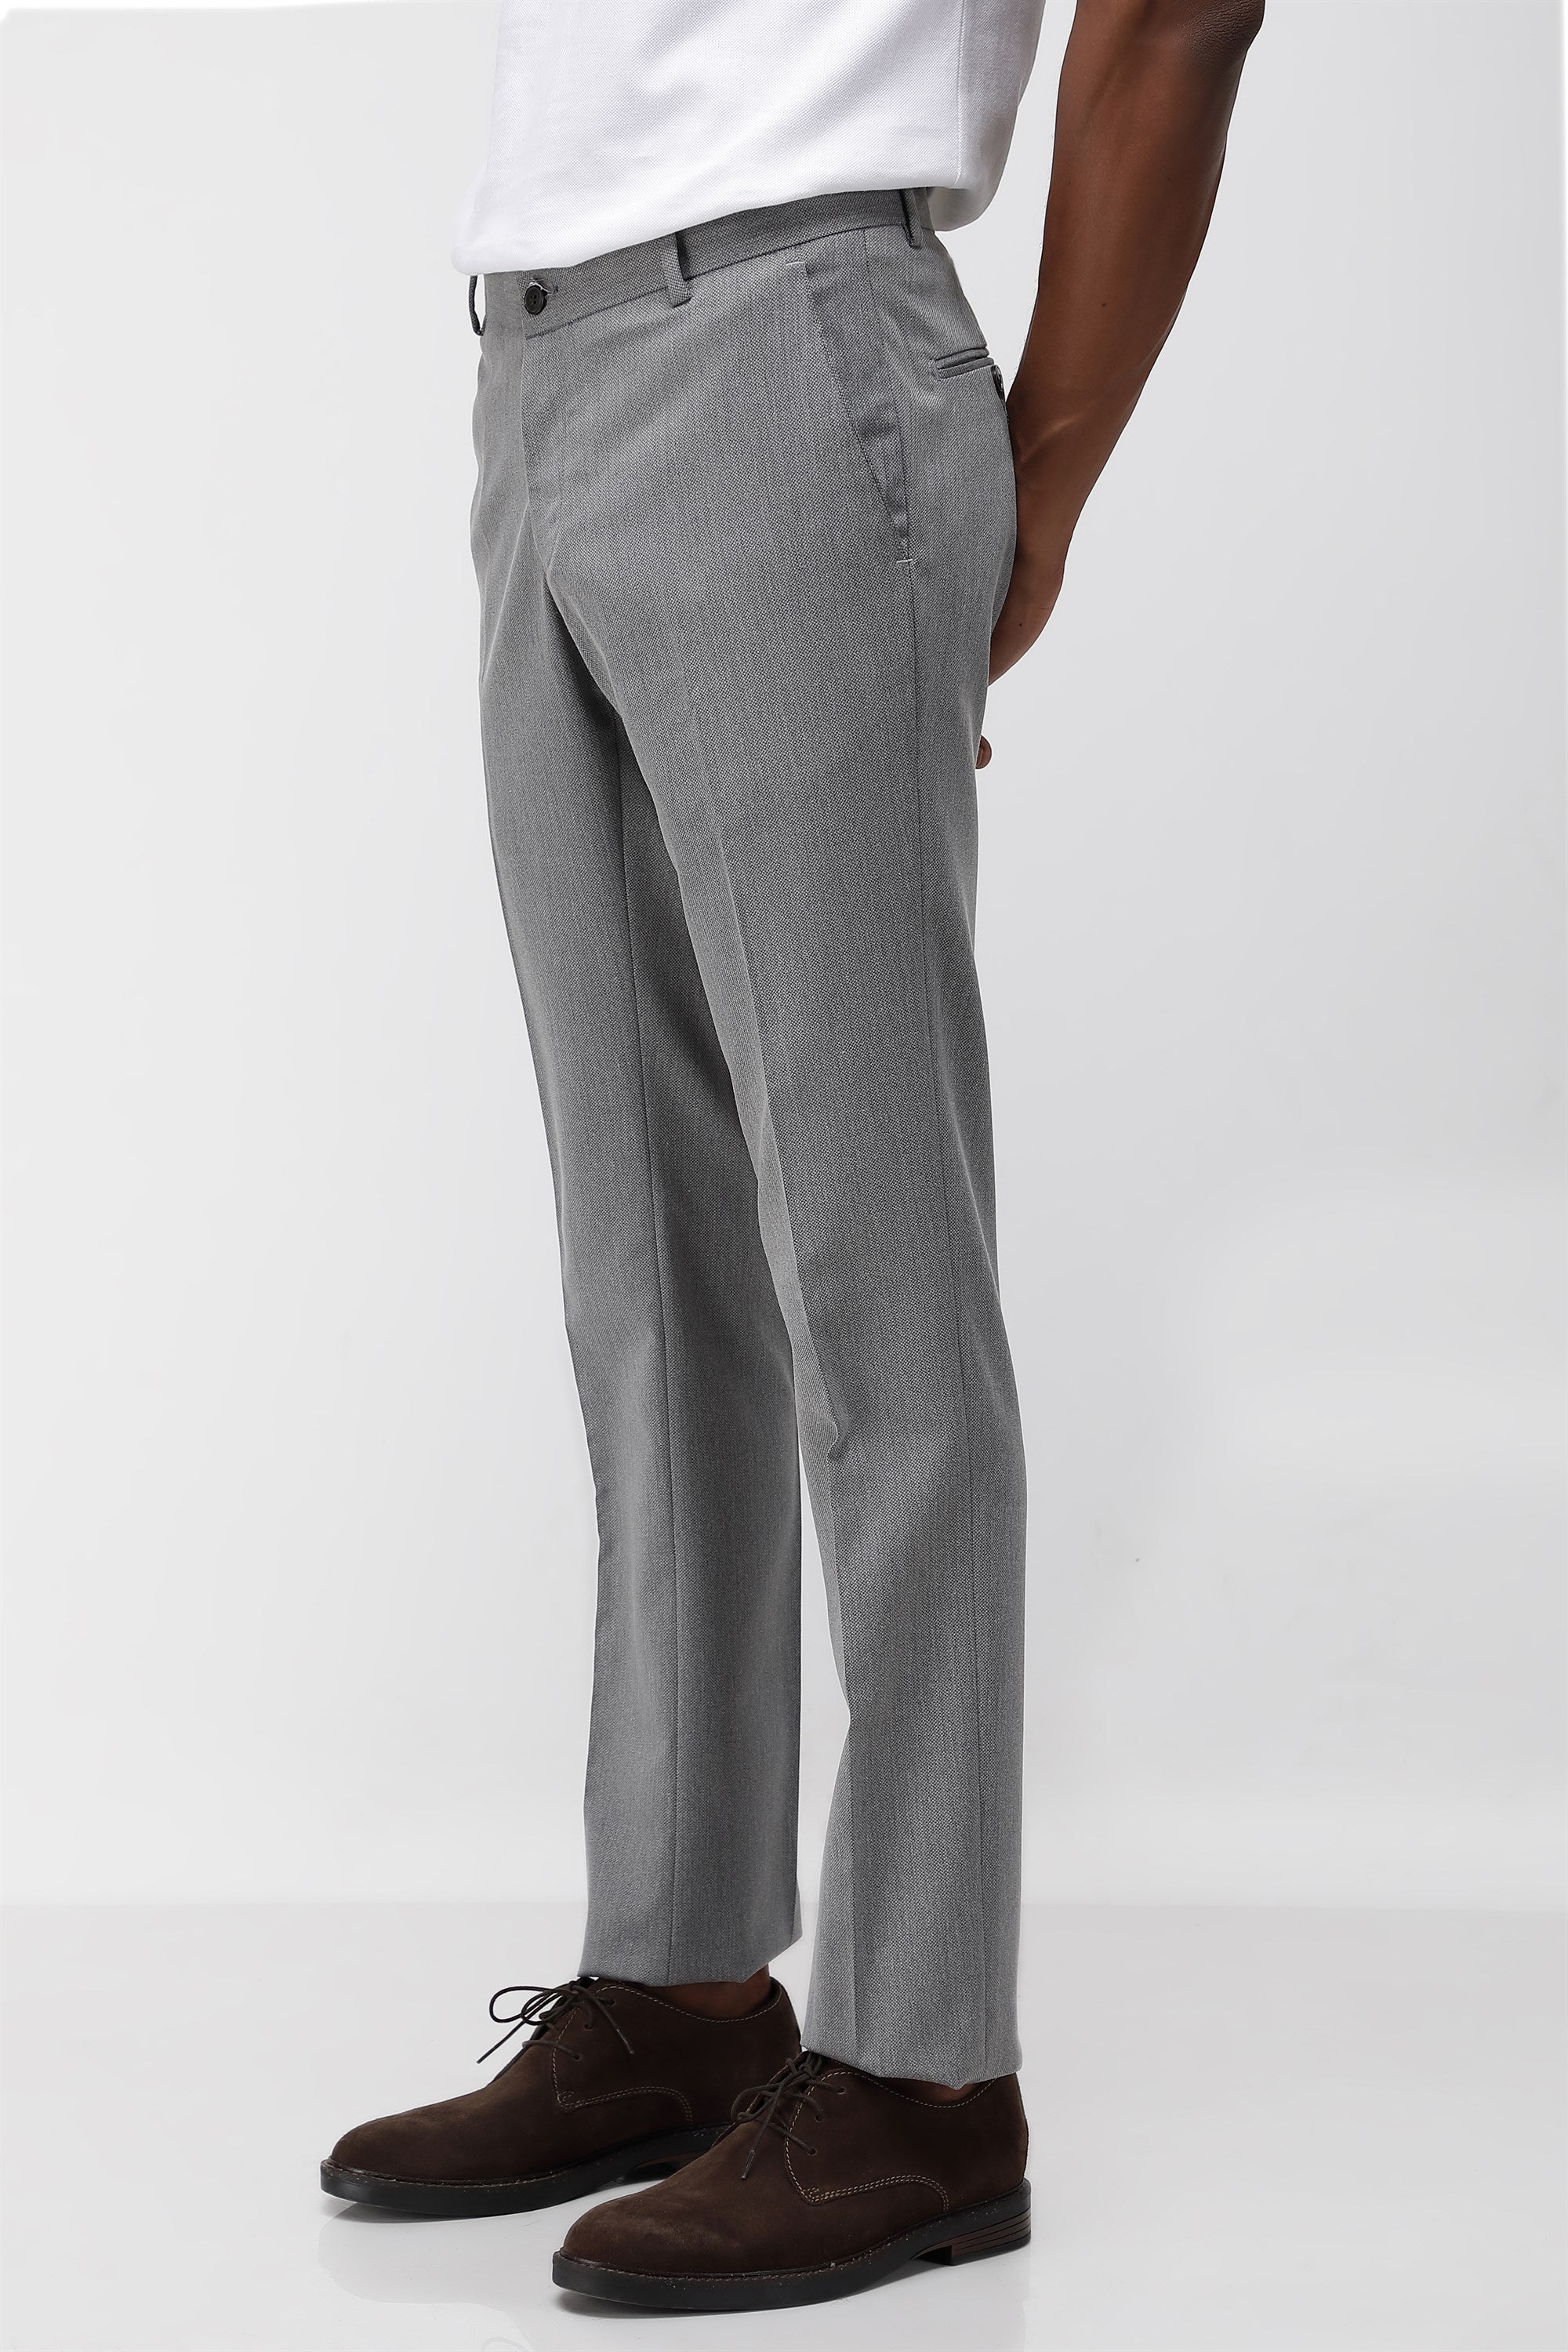 Buy INTUNE Grey Grey Slim Fit Stretch Formal Pants  Shoppers Stop